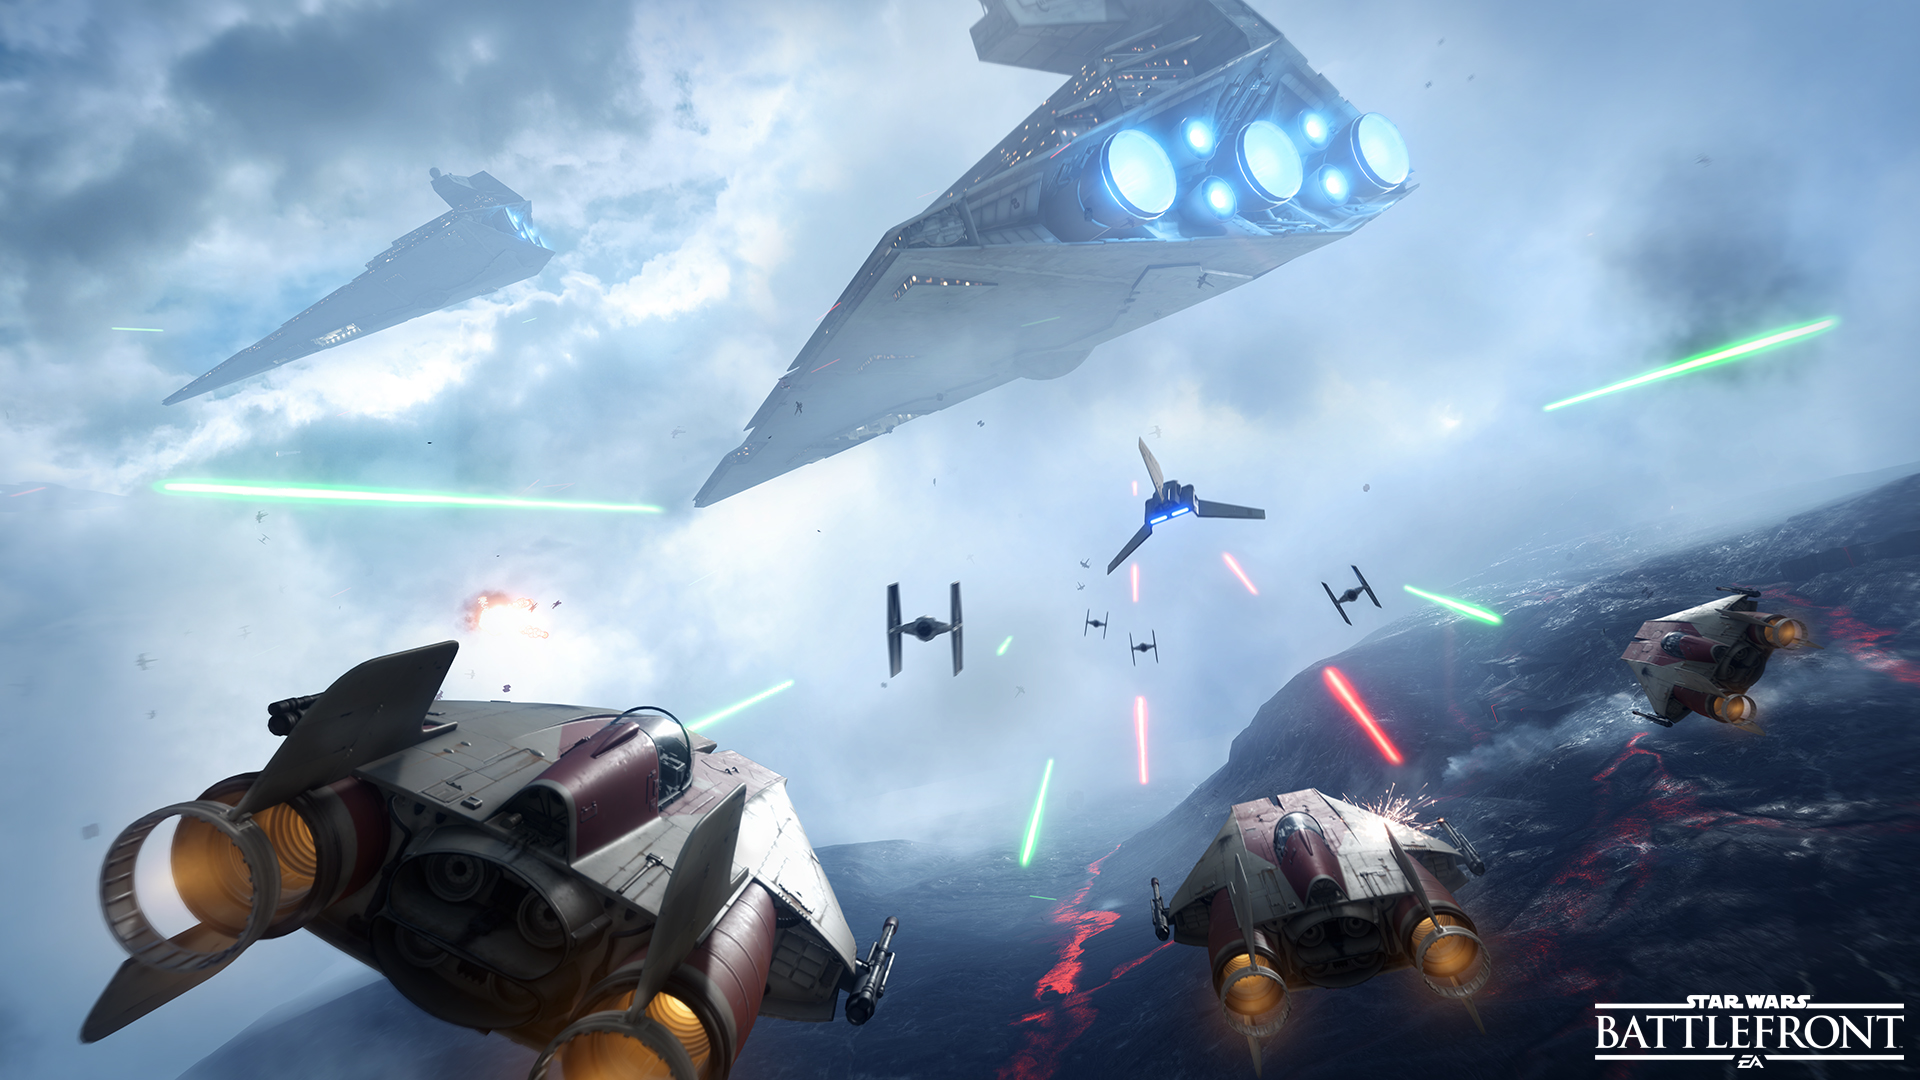 EA Confirms “Star Wars Battlefront” Sequel for 2017 - Will Feature Content From 